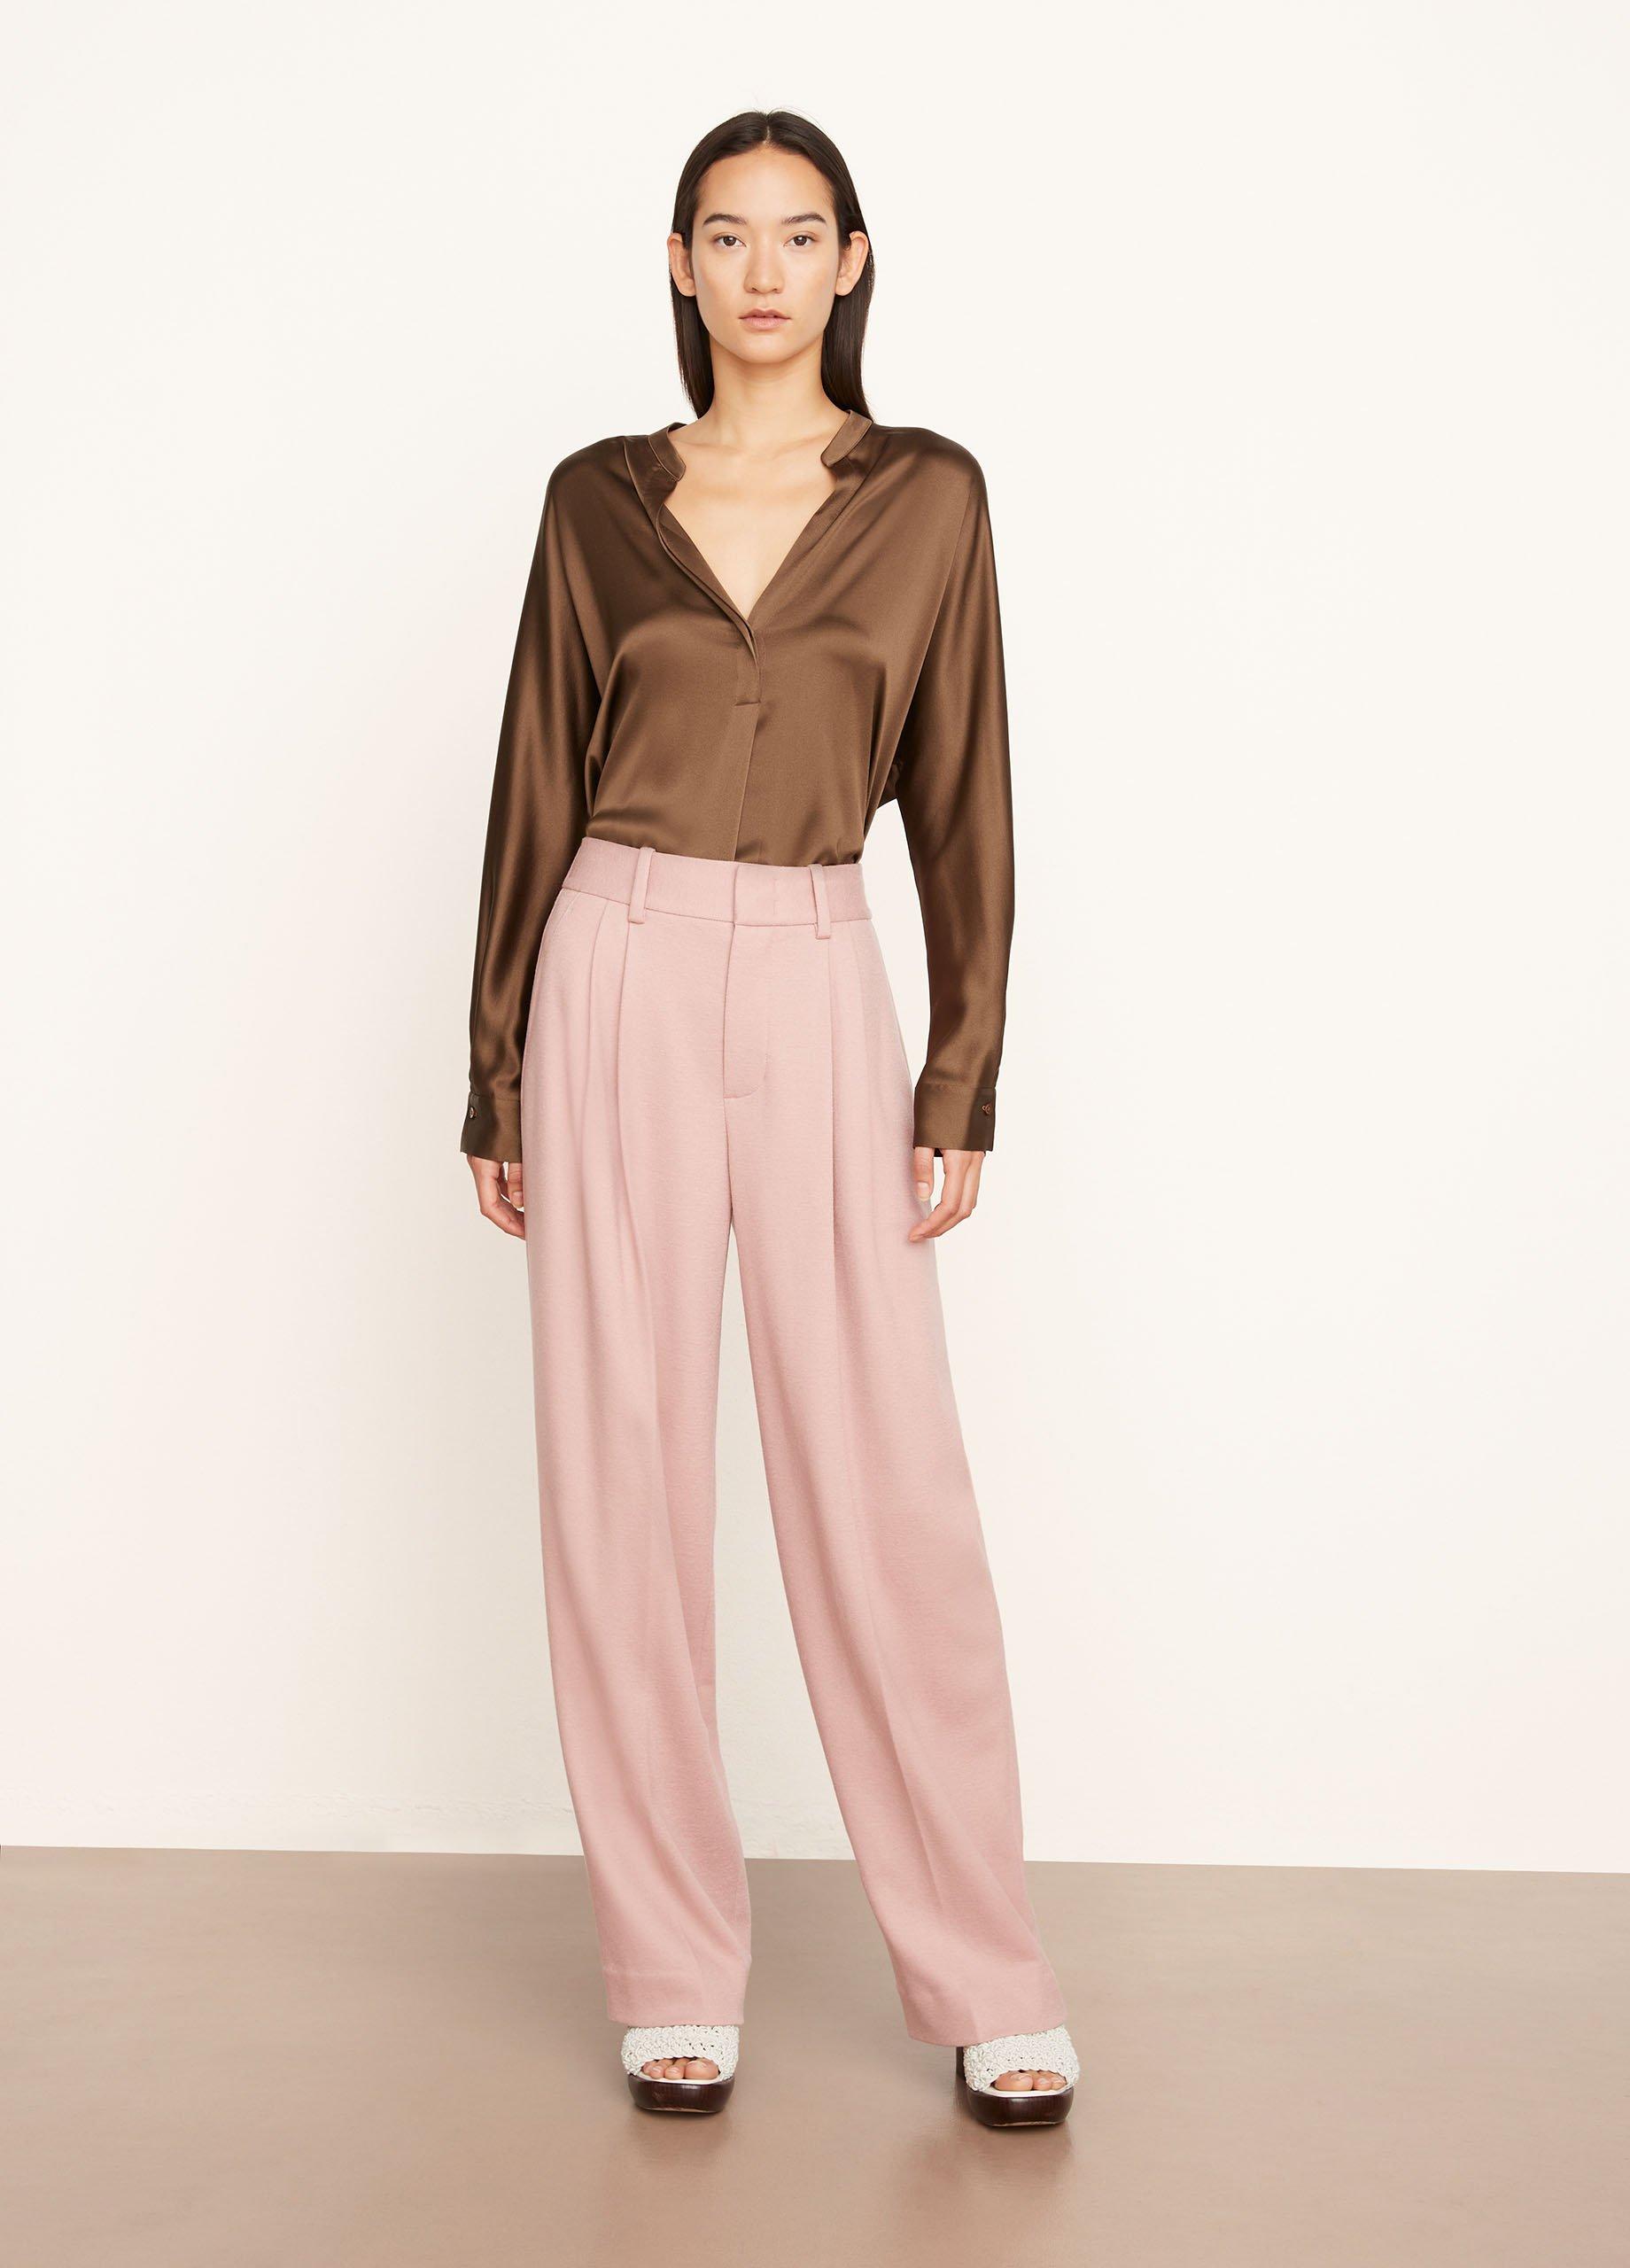 High-Waist Cozy Wool Pleat-Front Trouser in Vince Products Women